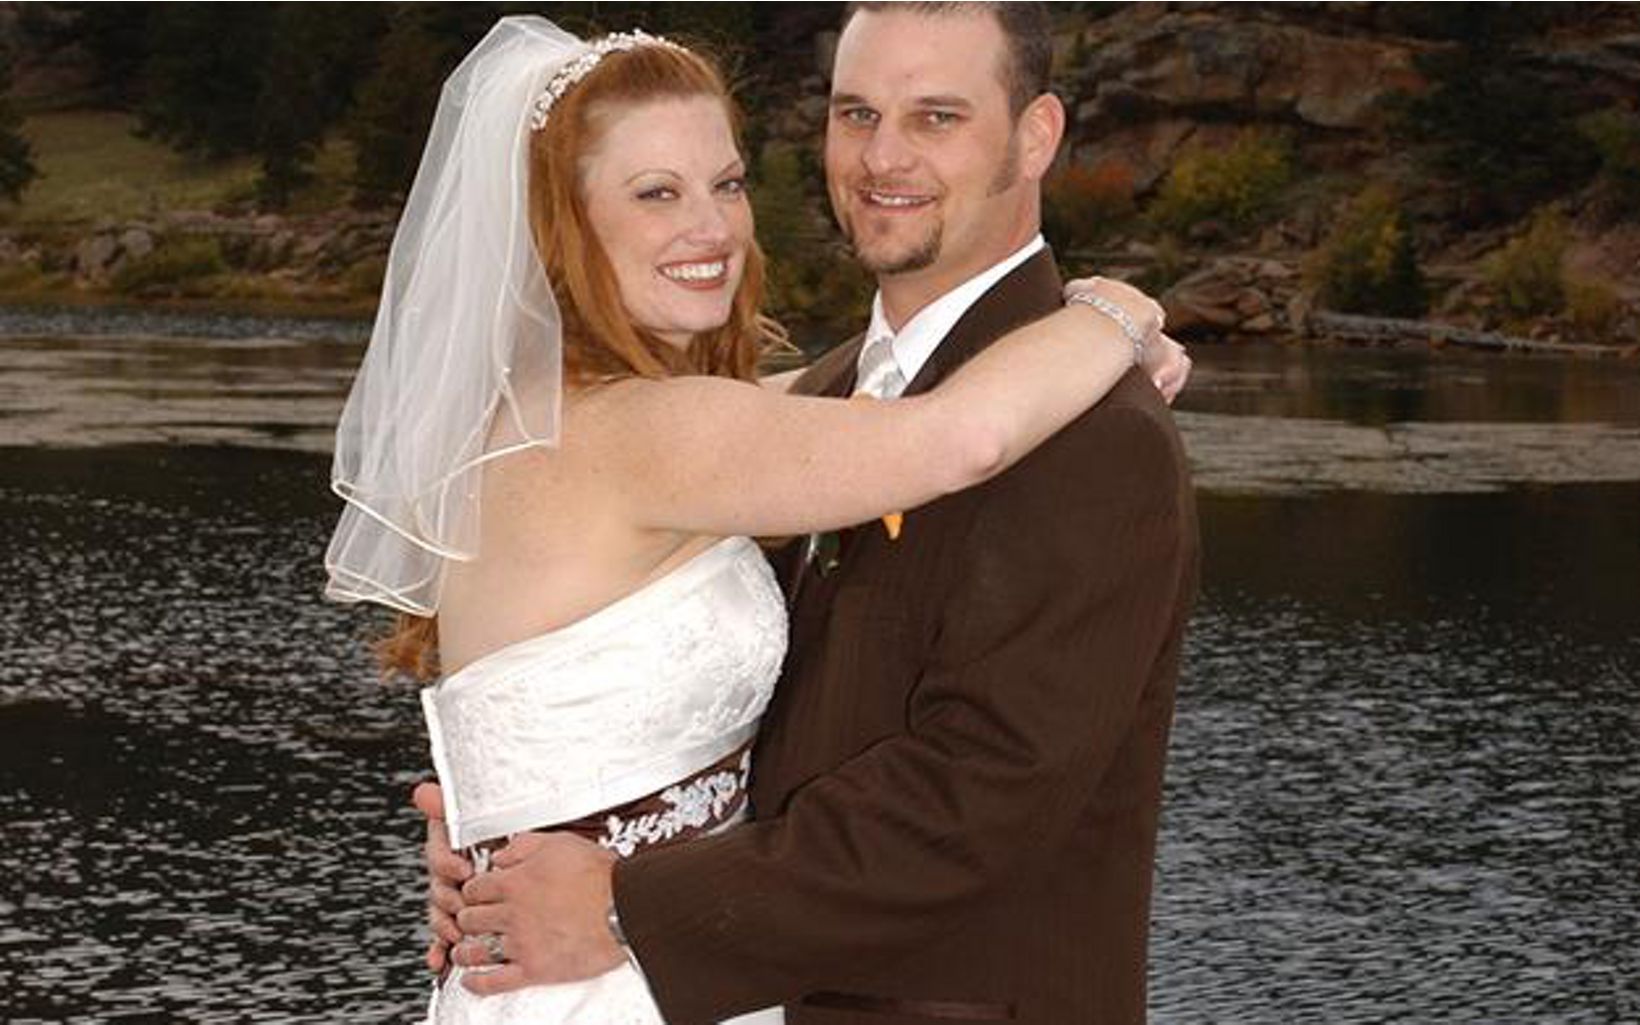 True to their passion, Jeremy and Amanda said their vows outside in Estes Park, CO.  